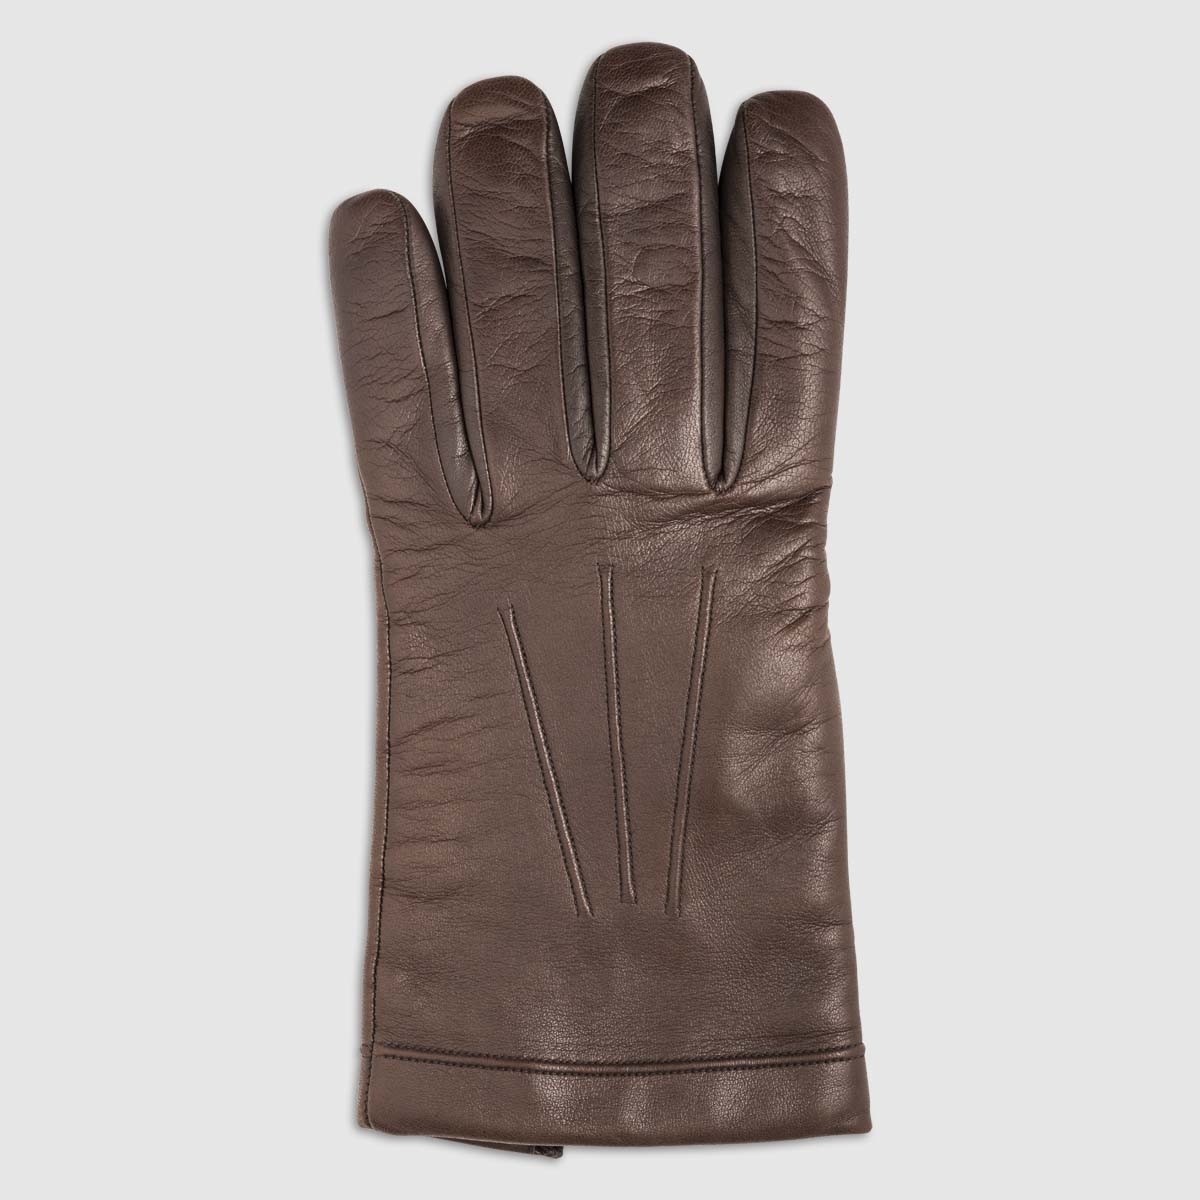 Nappa Leather Glove with Wool Lining – 8